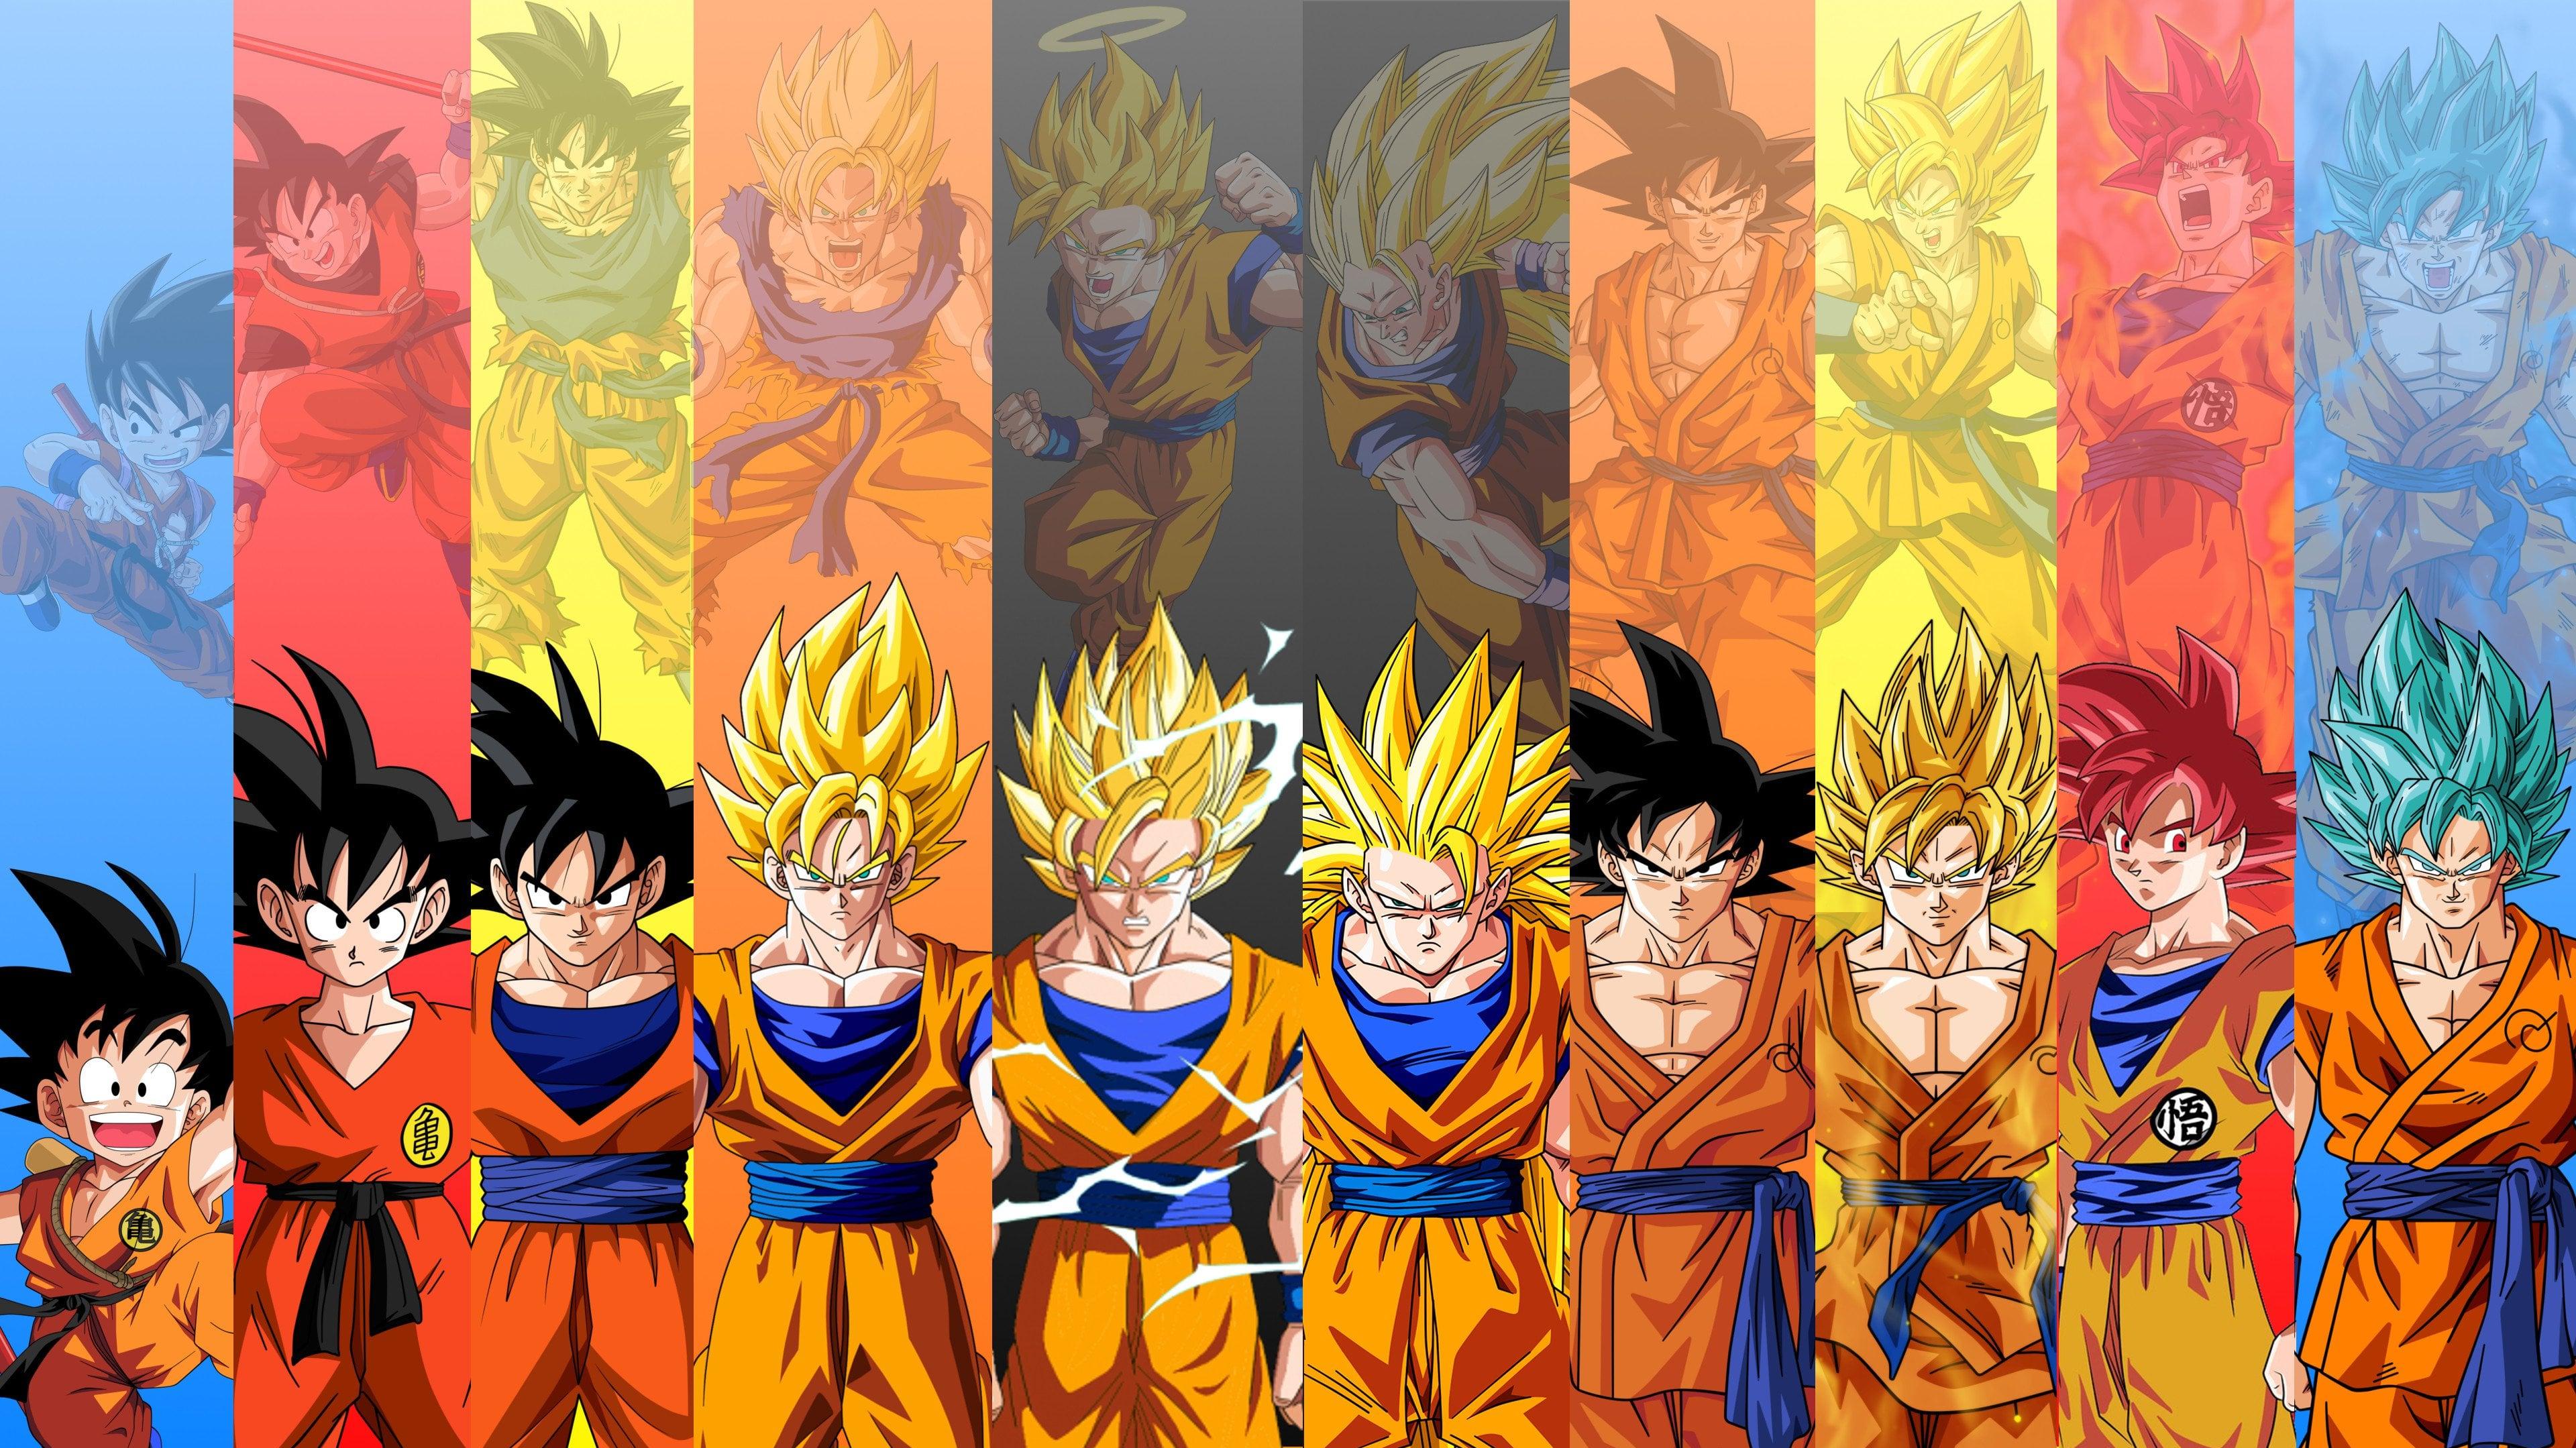 4k Wallpaper Featuring Forms Of Goku From Anime Dragon Ball